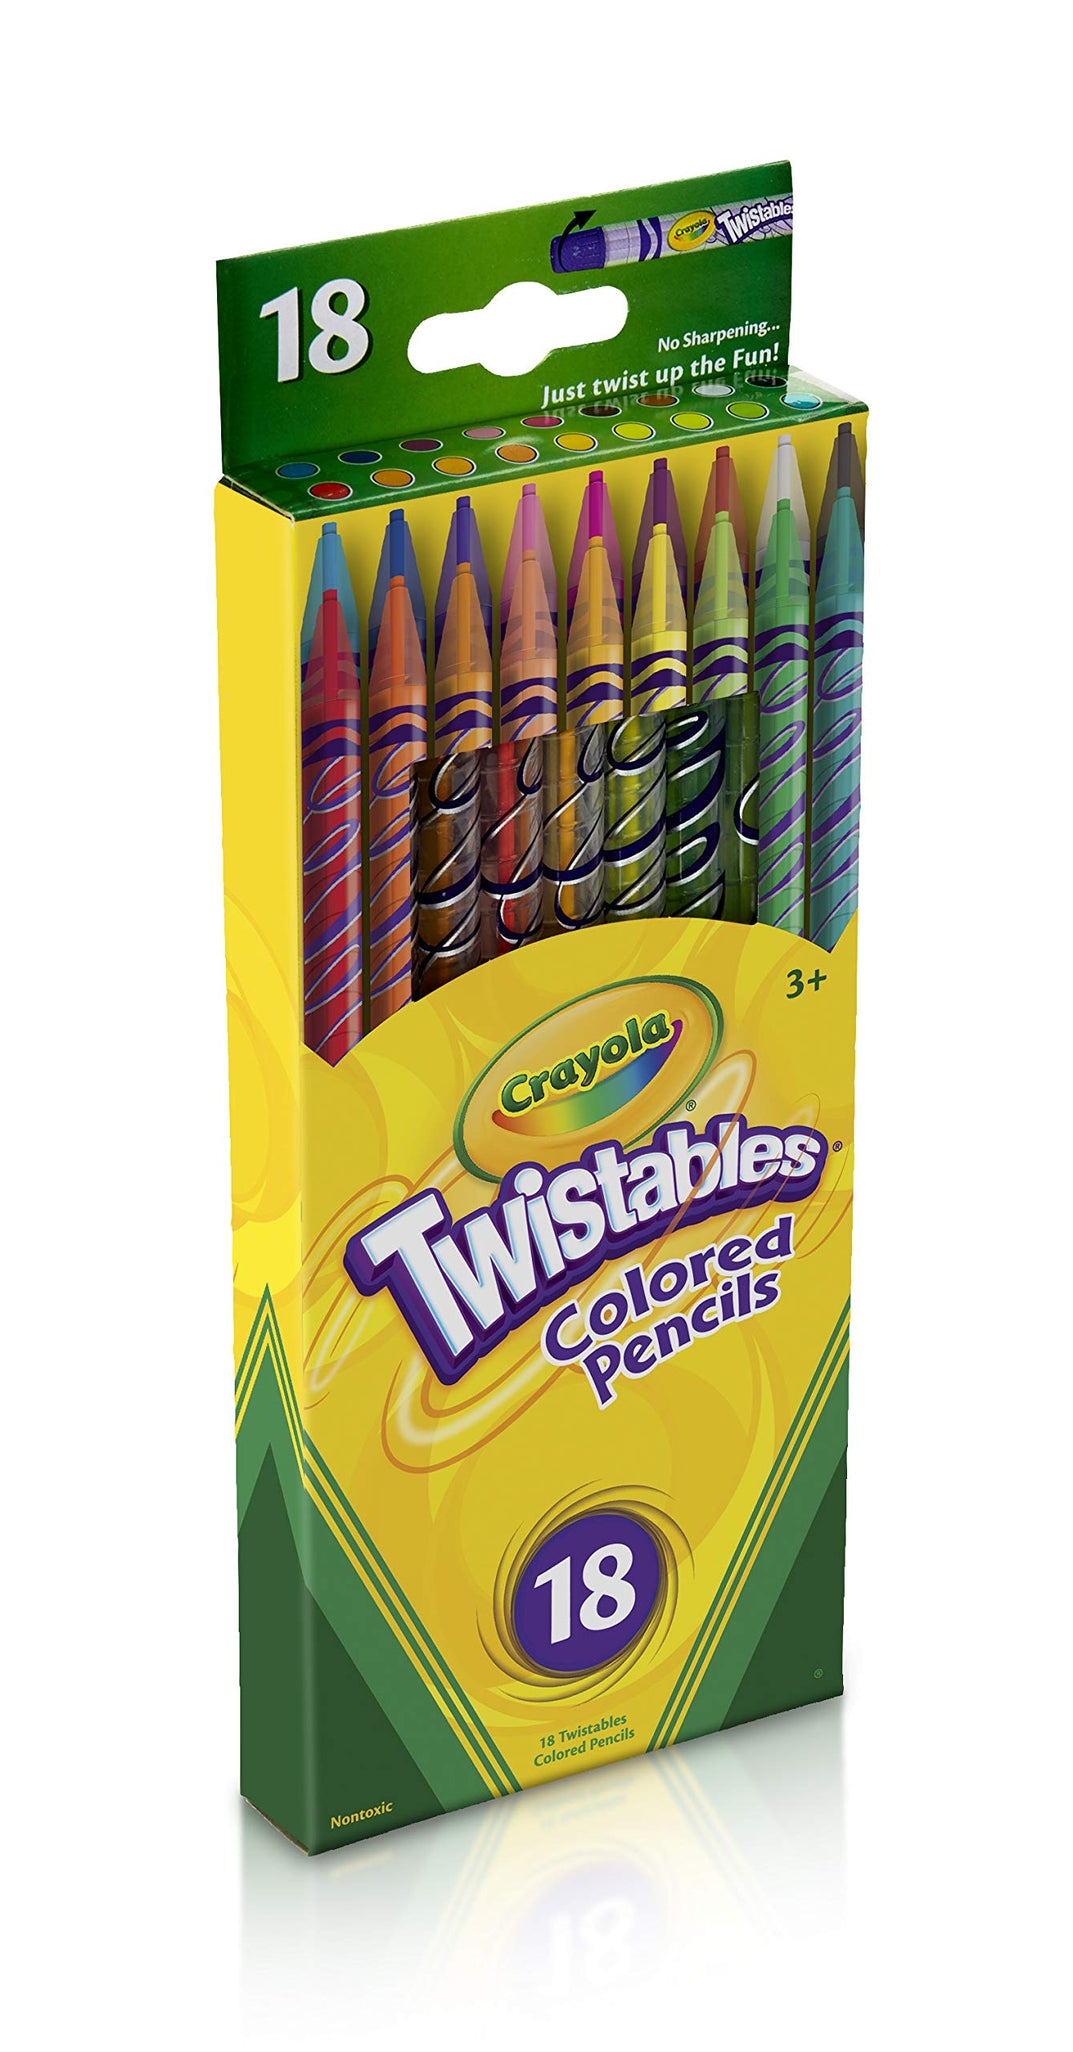 Crayola Twistable Colored Pencils, Gift for Kids, 18 Count